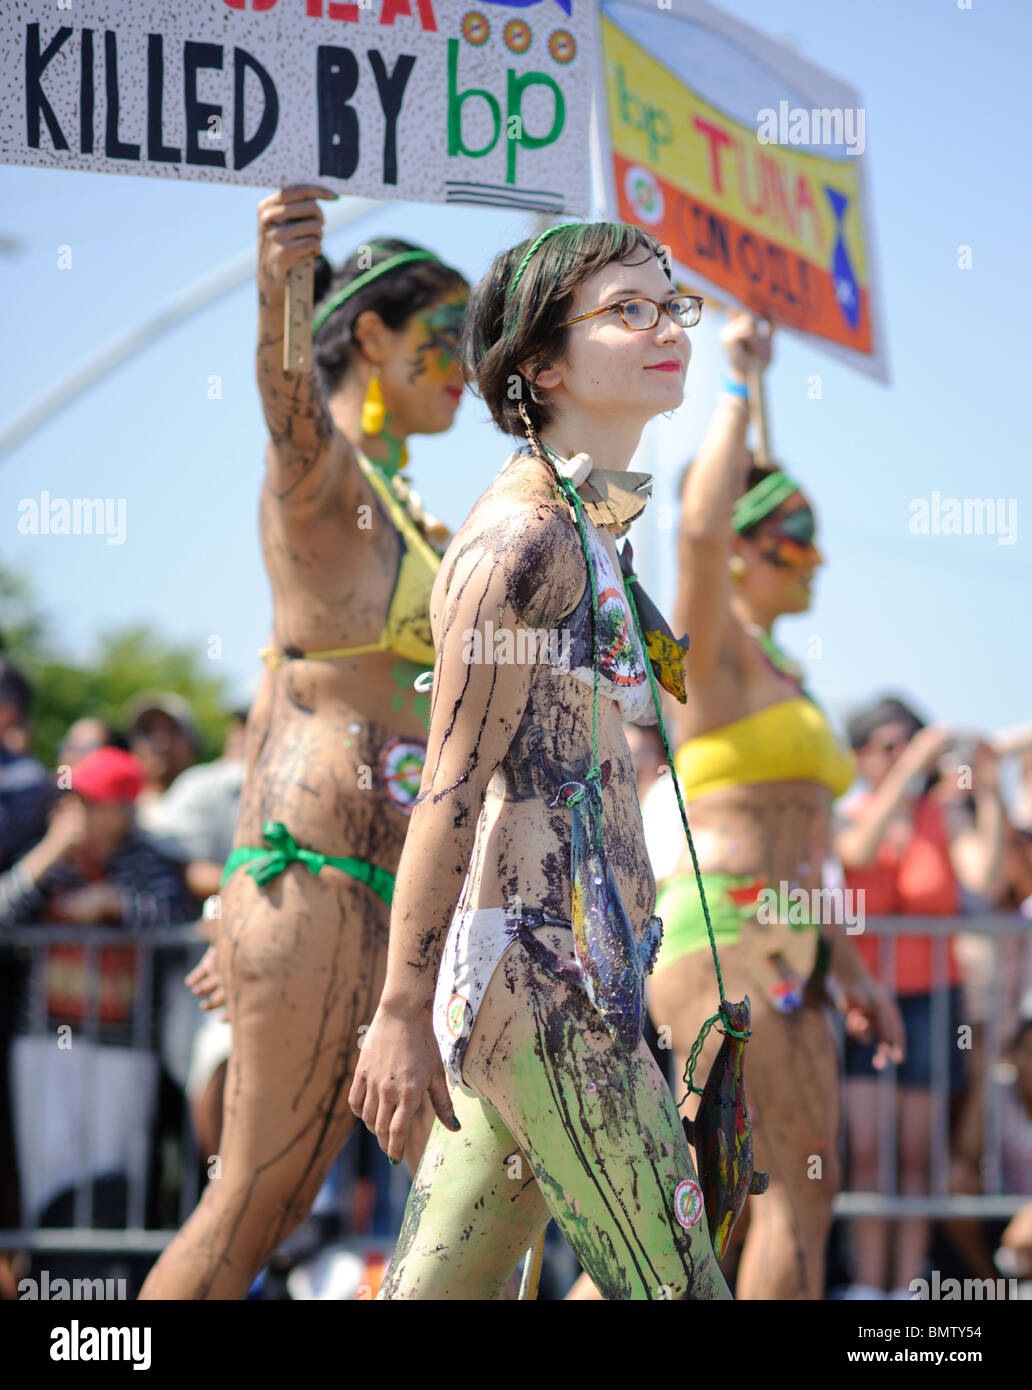 NEW YORK - JUNE 19: Parade participants protest the oil spill at the 2010 Mermaid Parade at Coney Island on June 19 2010. Stock Photo